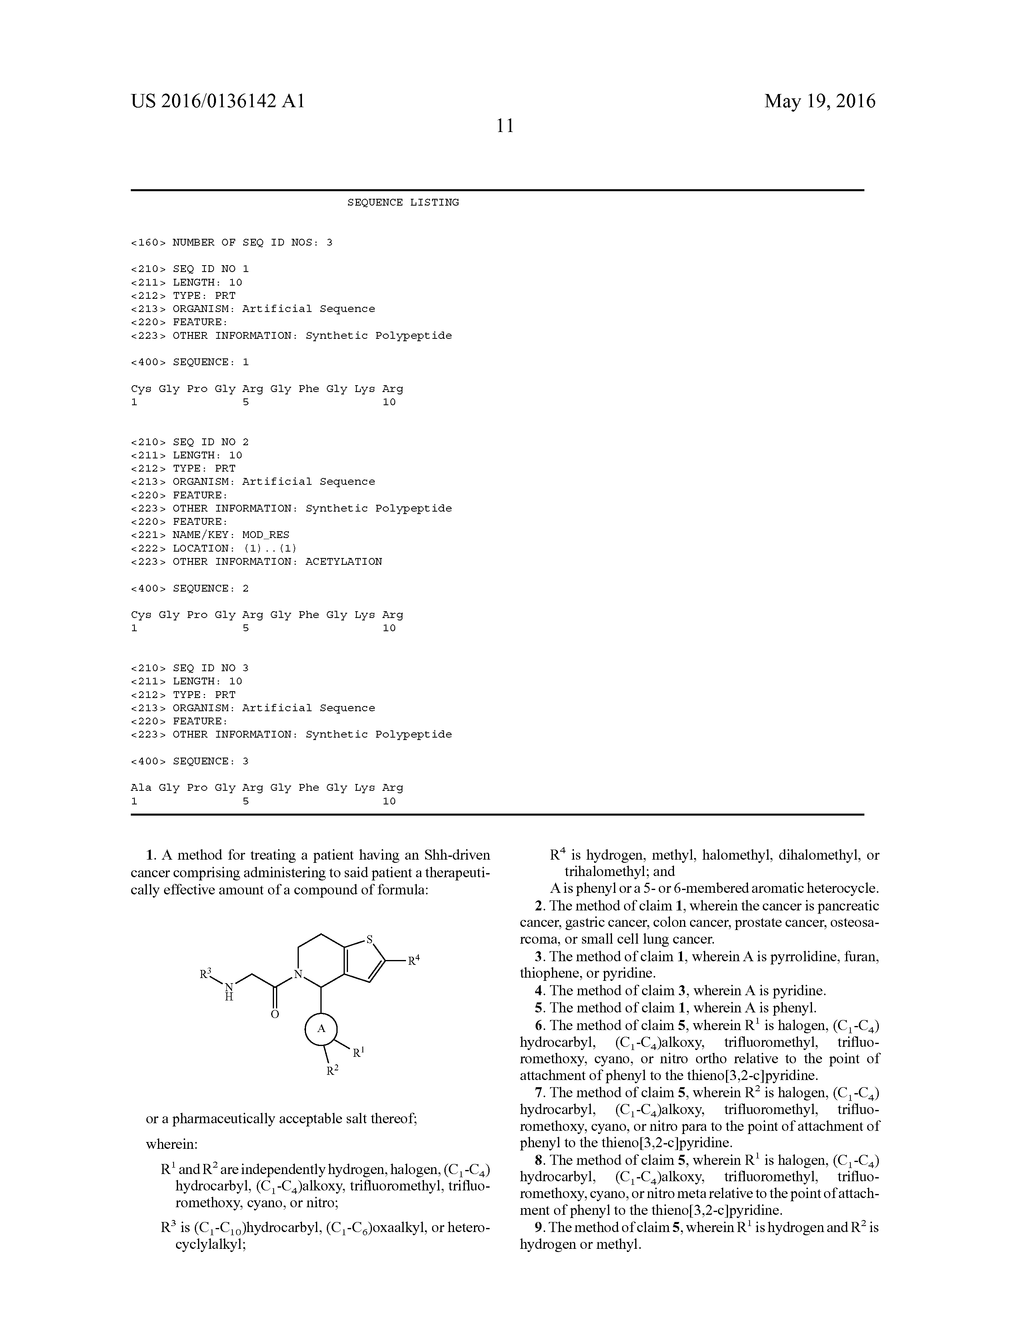 TREATMENT OF PANCREATIC AND RELATED CANCERS WITH     5-ACYL-6,7-DIHYDROTHIENO[3,2-C]PYRIDINES - diagram, schematic, and image 15